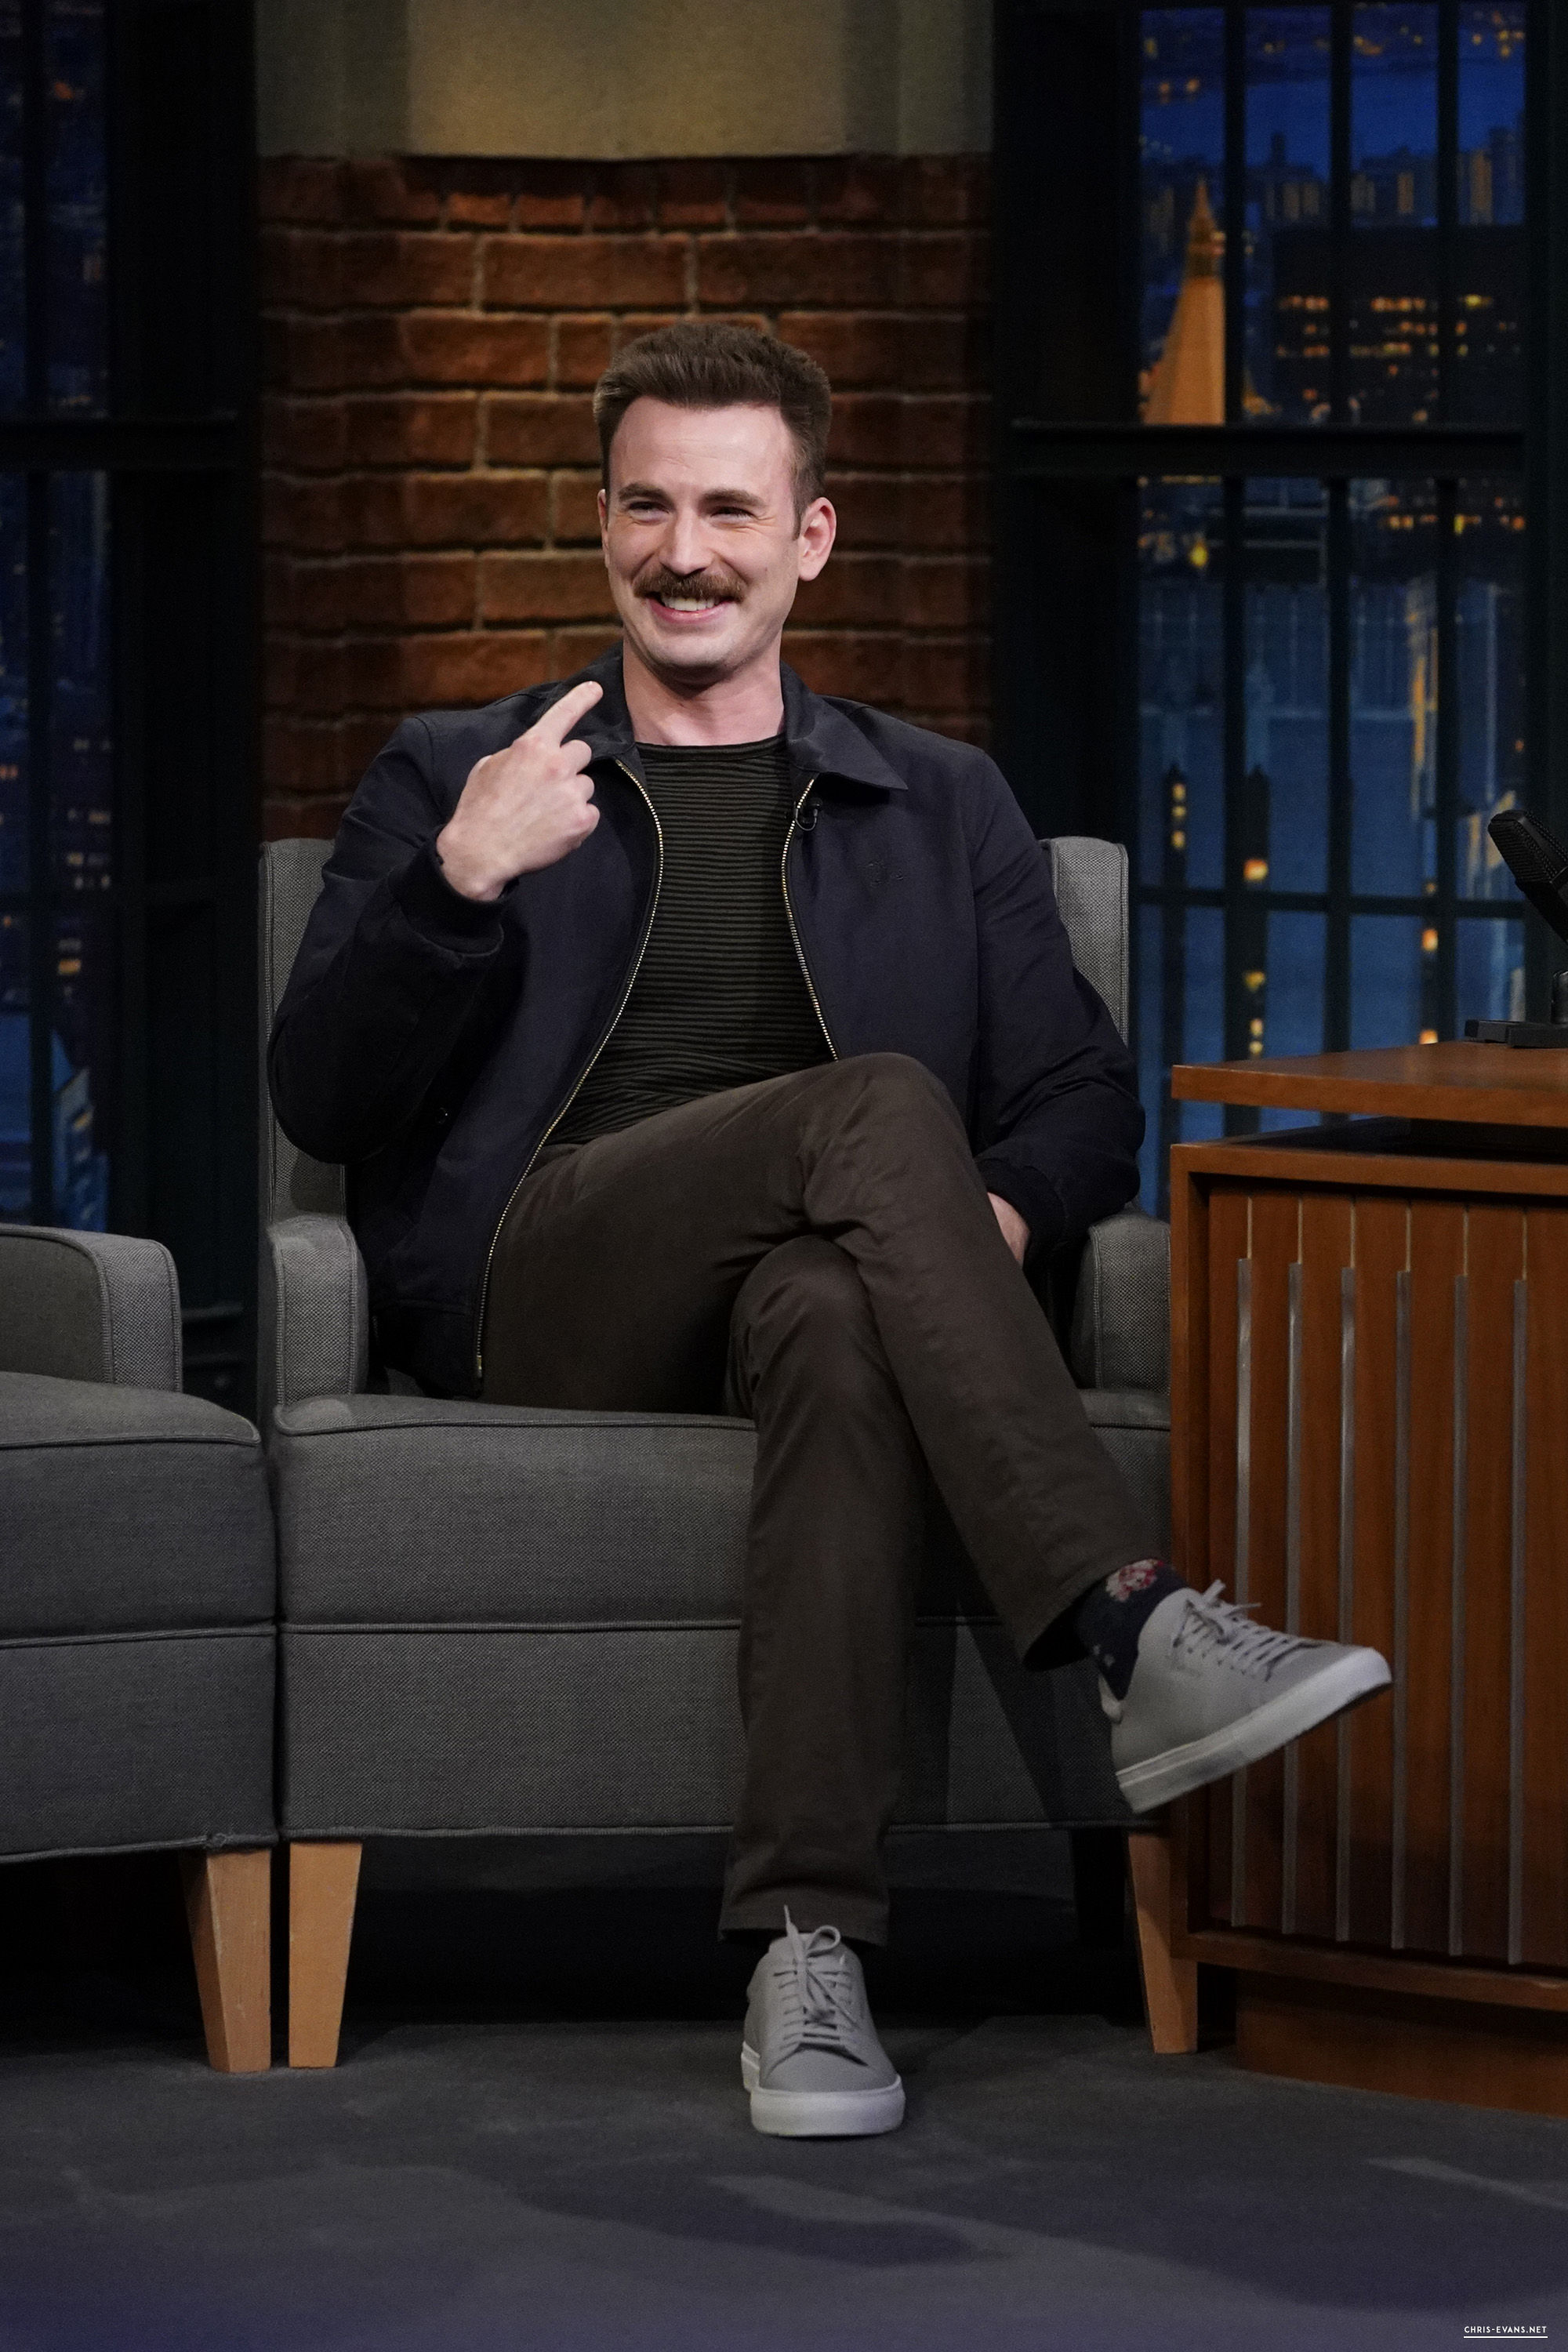 http://chris-evans.net/photos/albums/Appearances/2018/04%2023%20Late%20Night%20with%20Seth%20Meyers/005.jpg